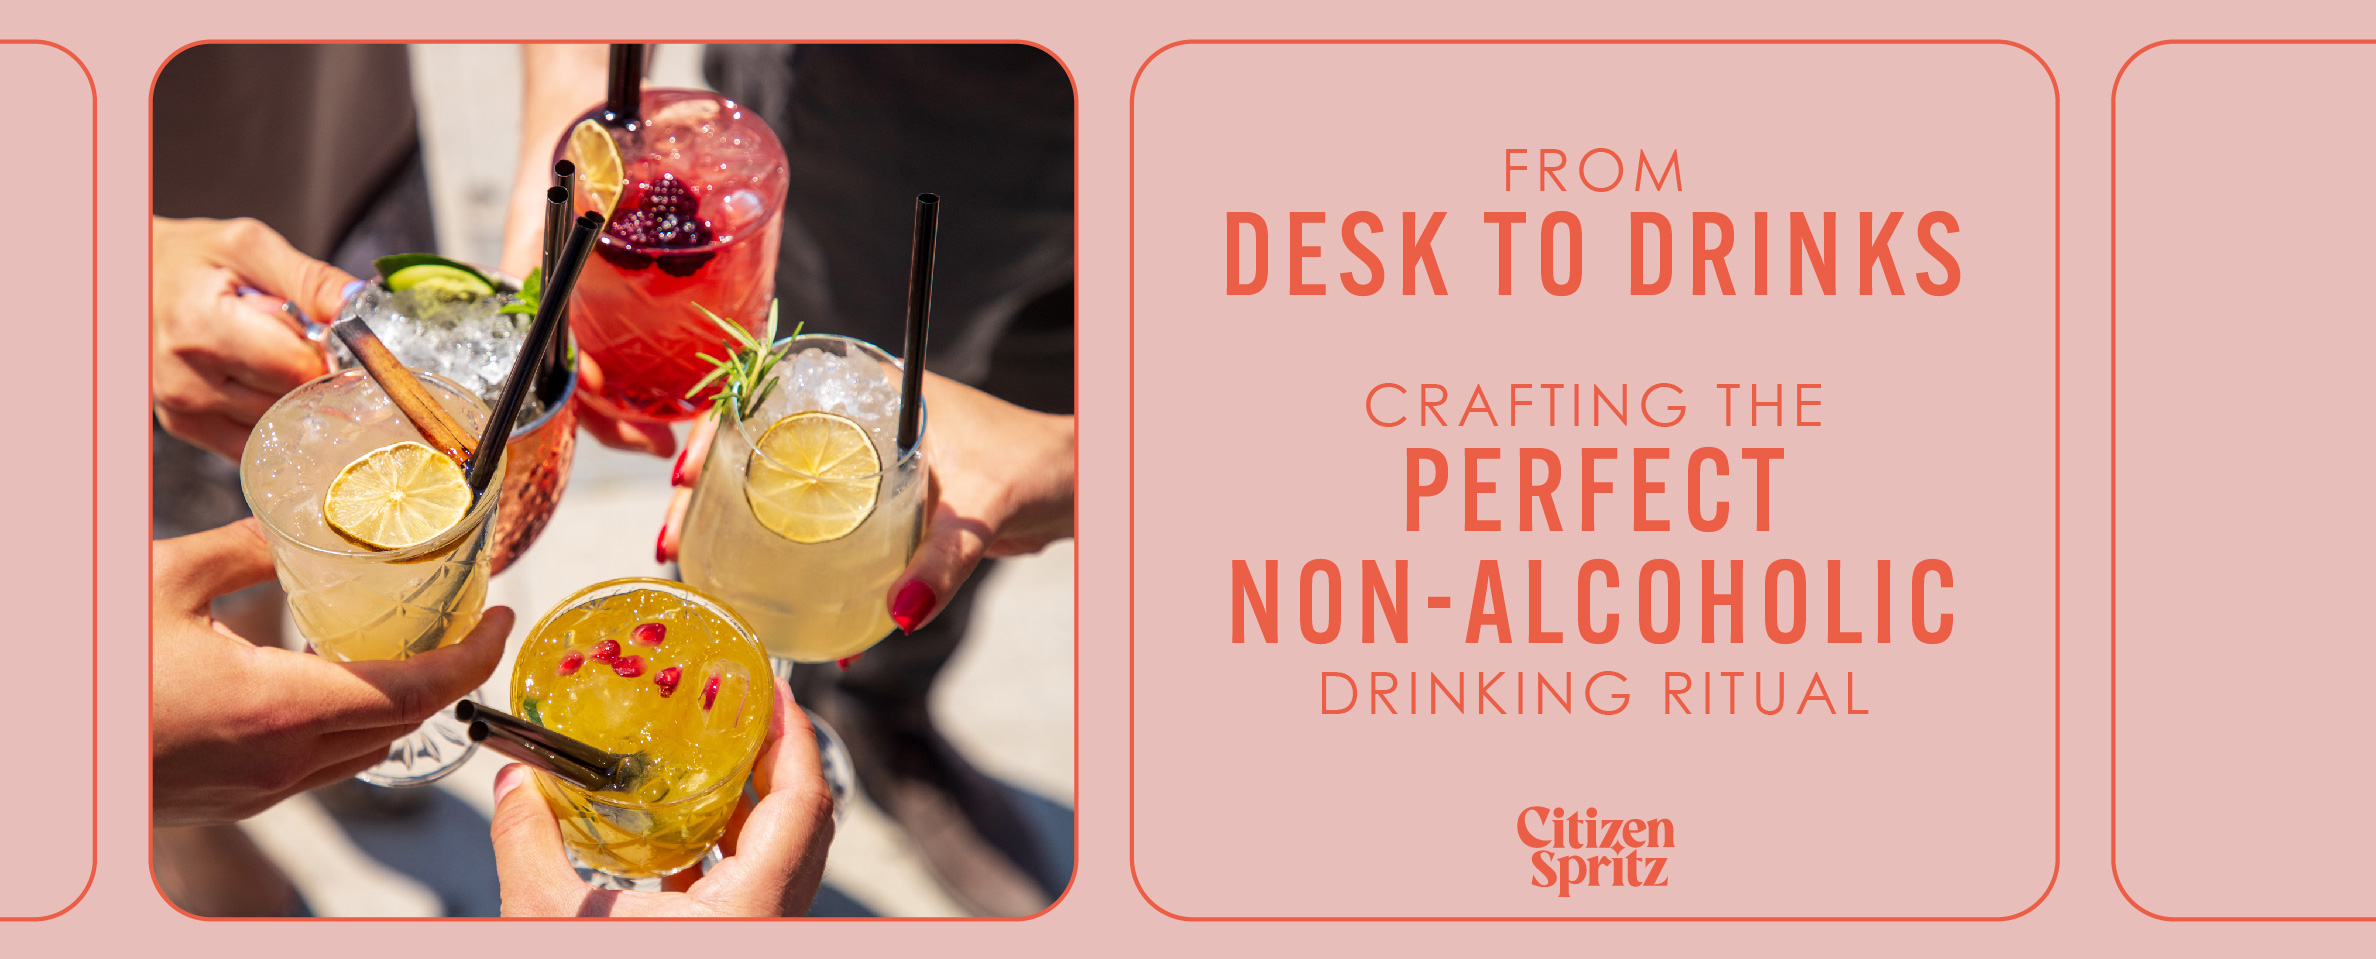 From Desk to Drinks: Crafting the Perfect Non-Alcoholic Drinking Ritual